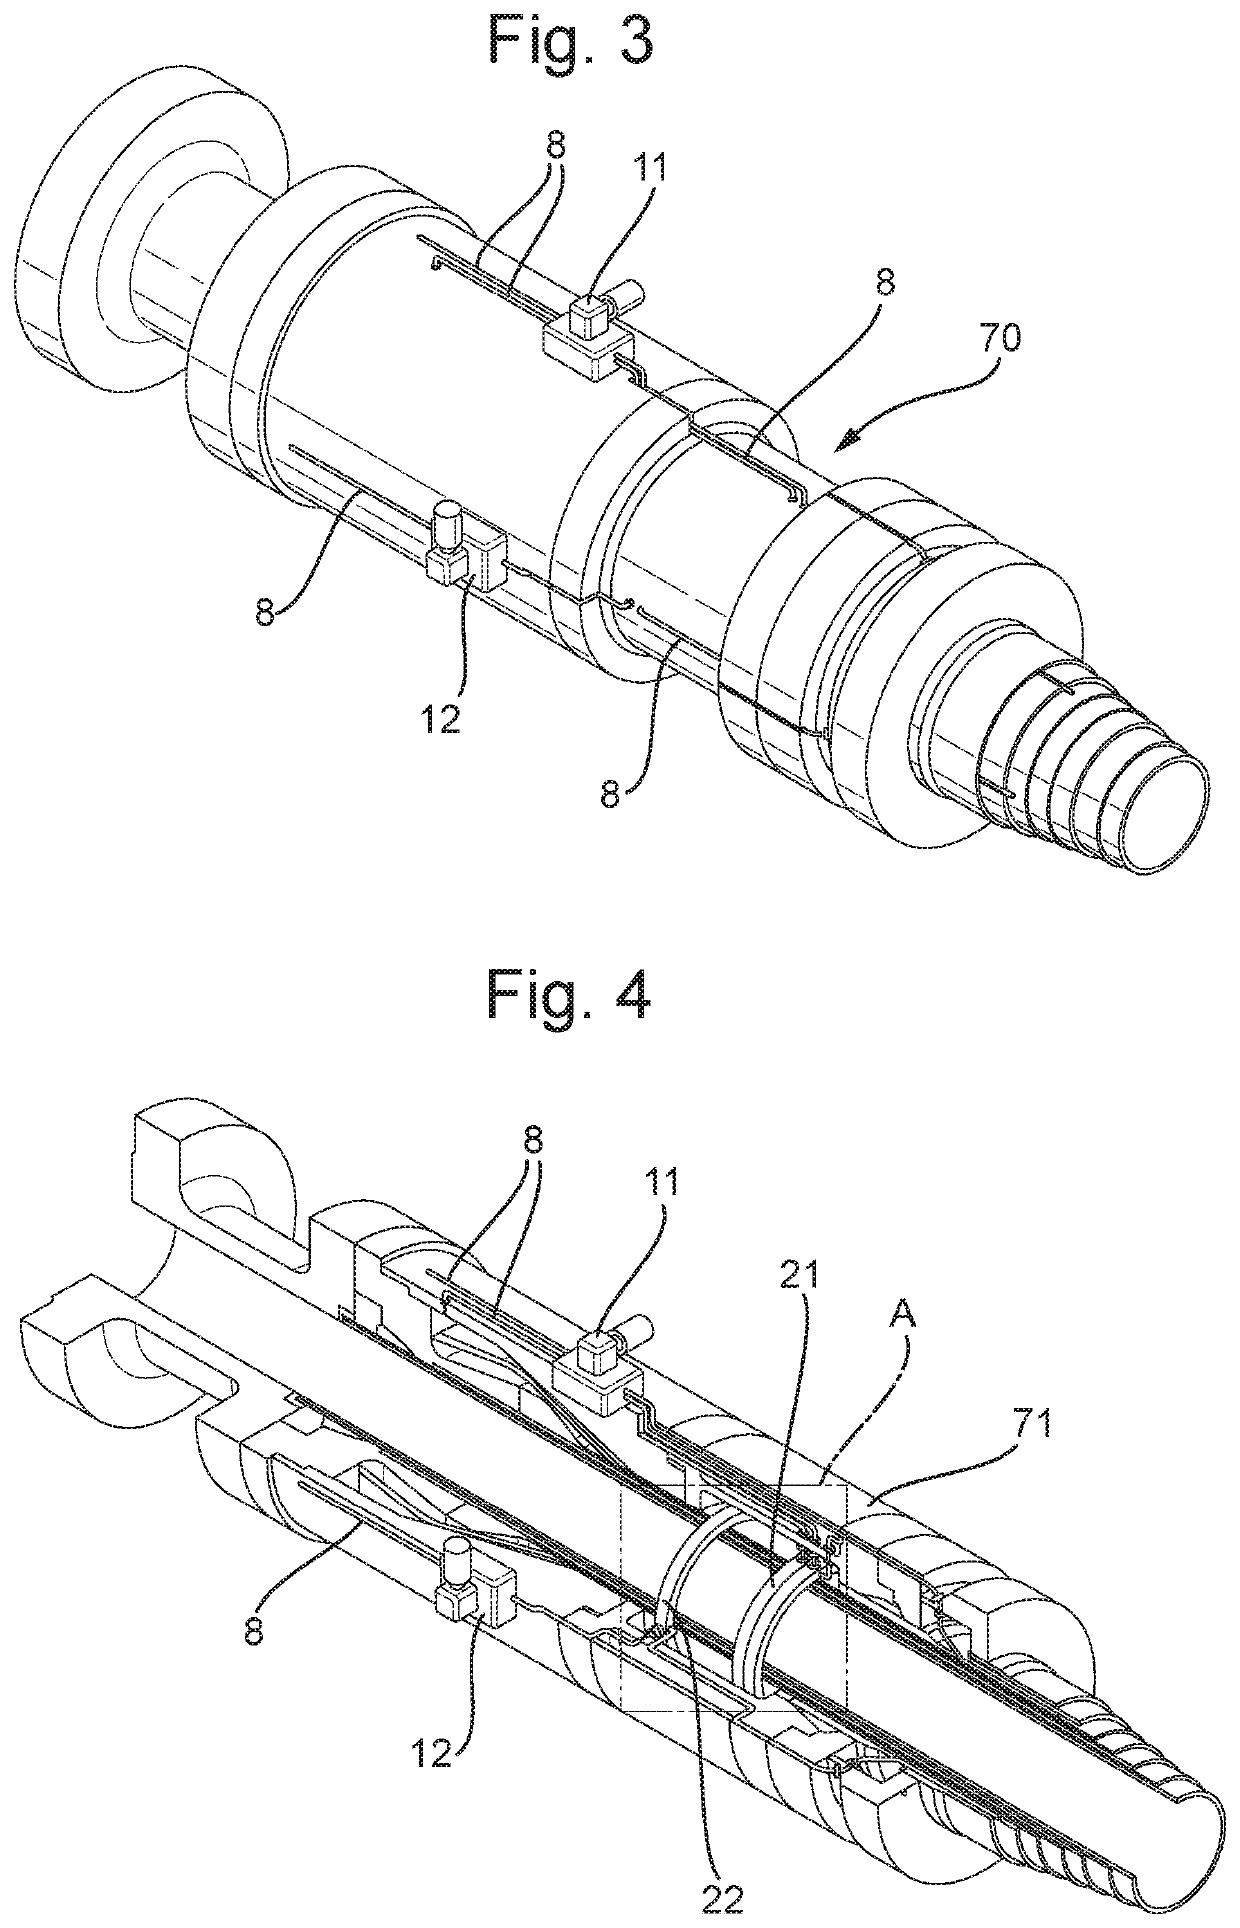 Flexible pipe connector suitable for effecting control and forced circulation of anticorrosive fluids through the annulus of the flexible pipe